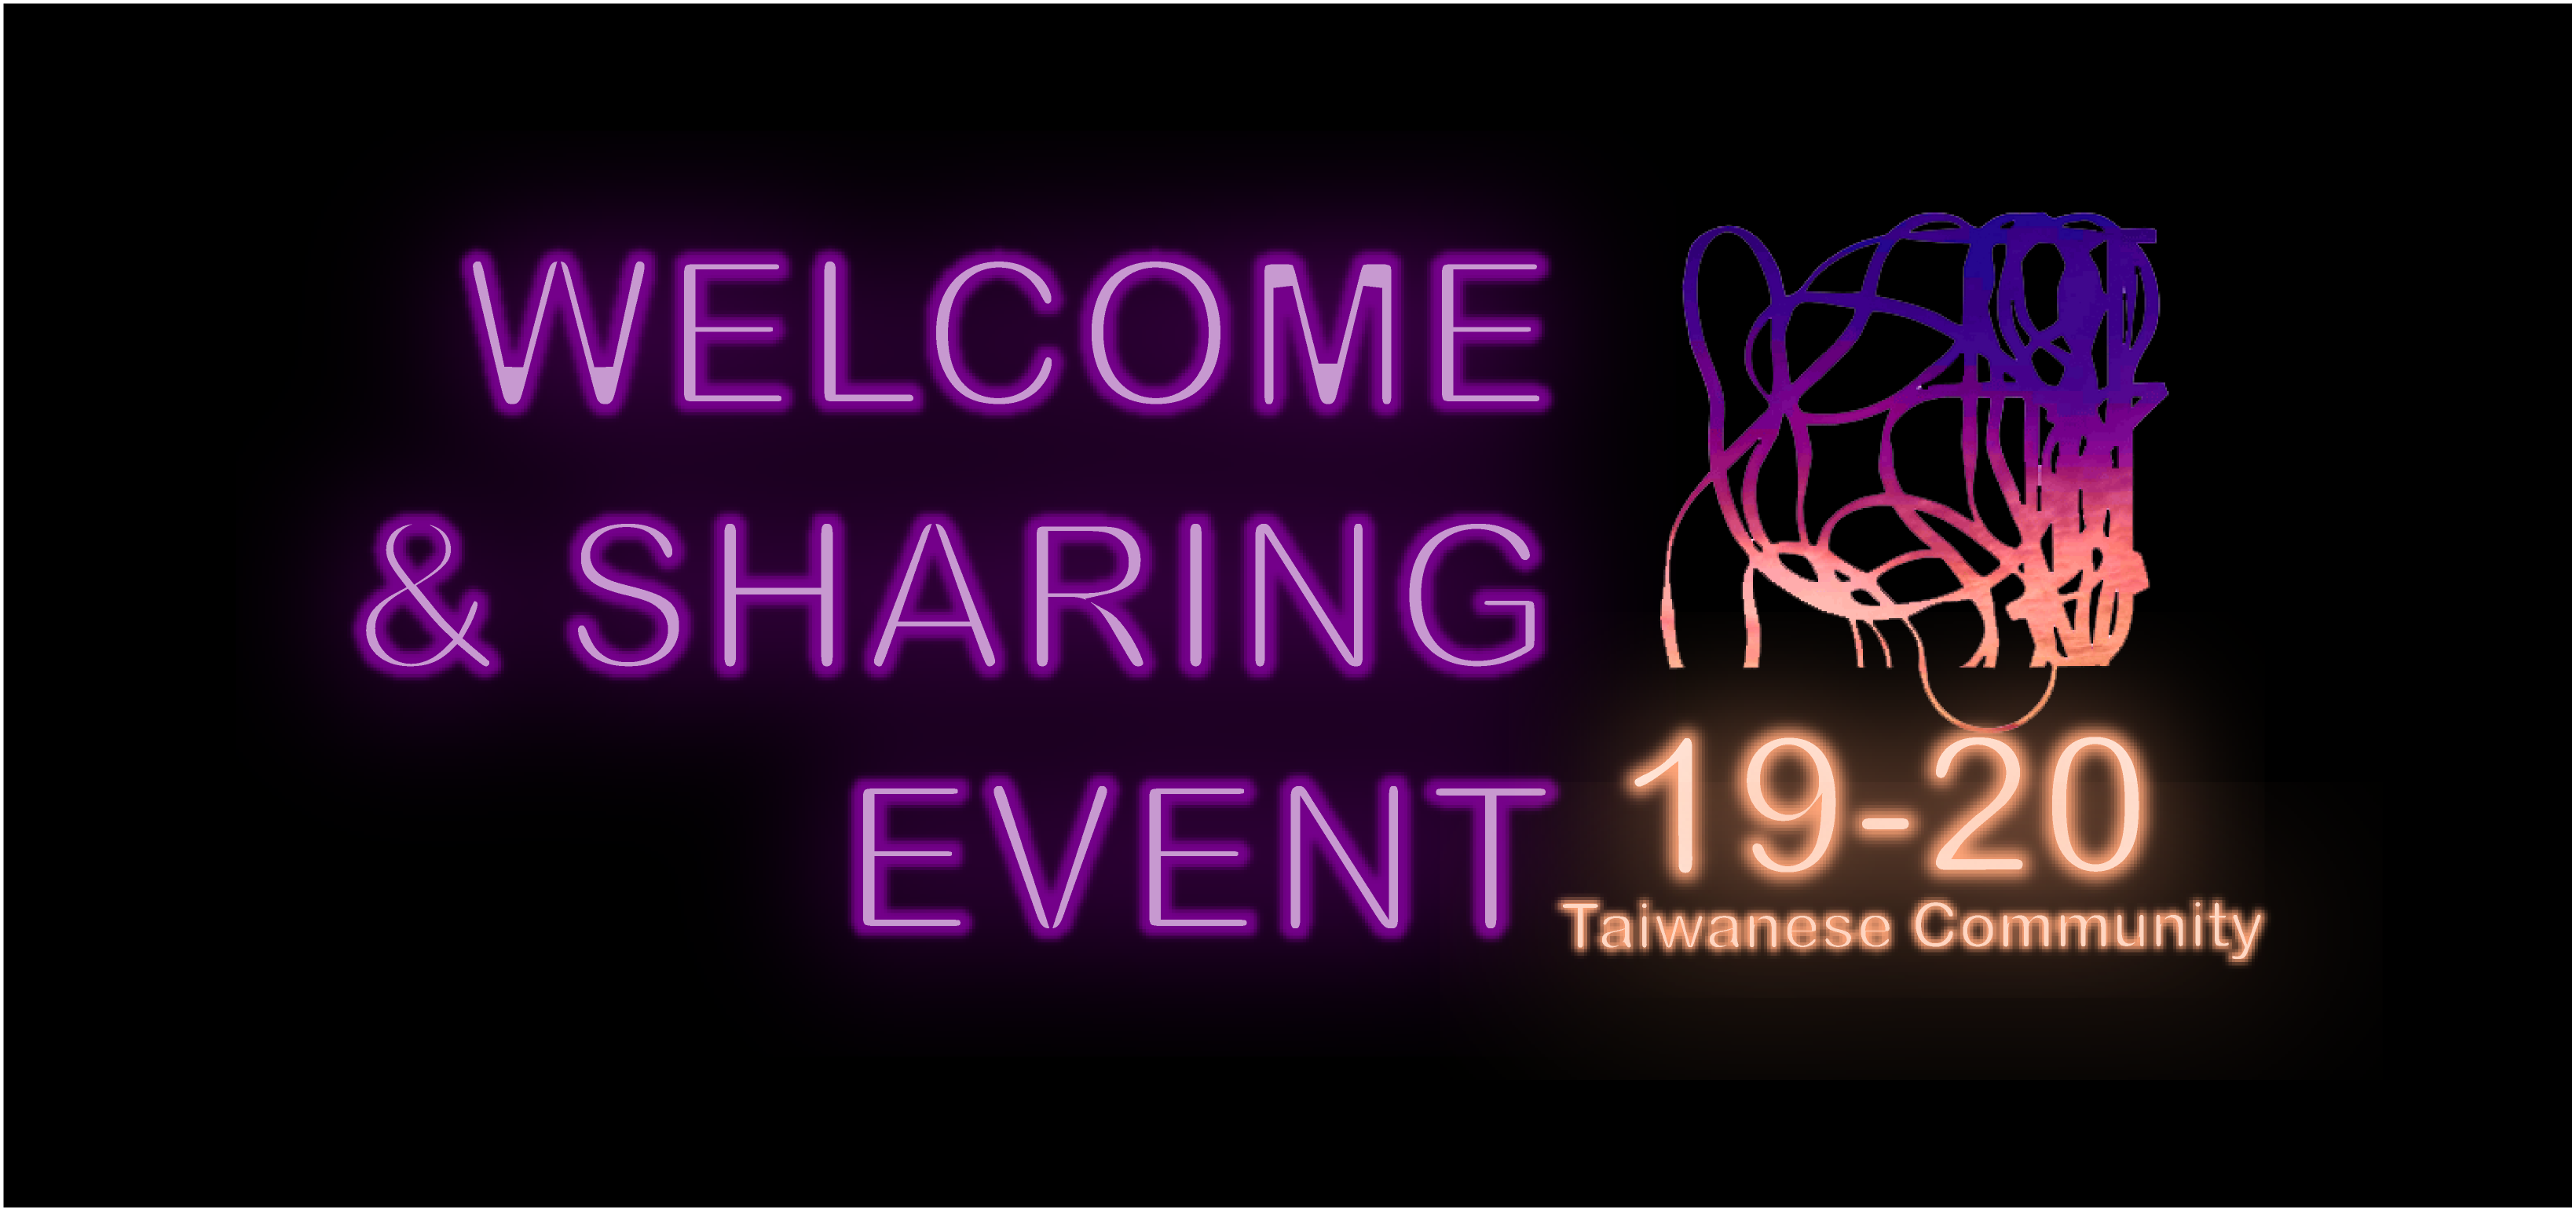 Taiwanese Community newcomers event banner design. Created with Adobe Illustrator.